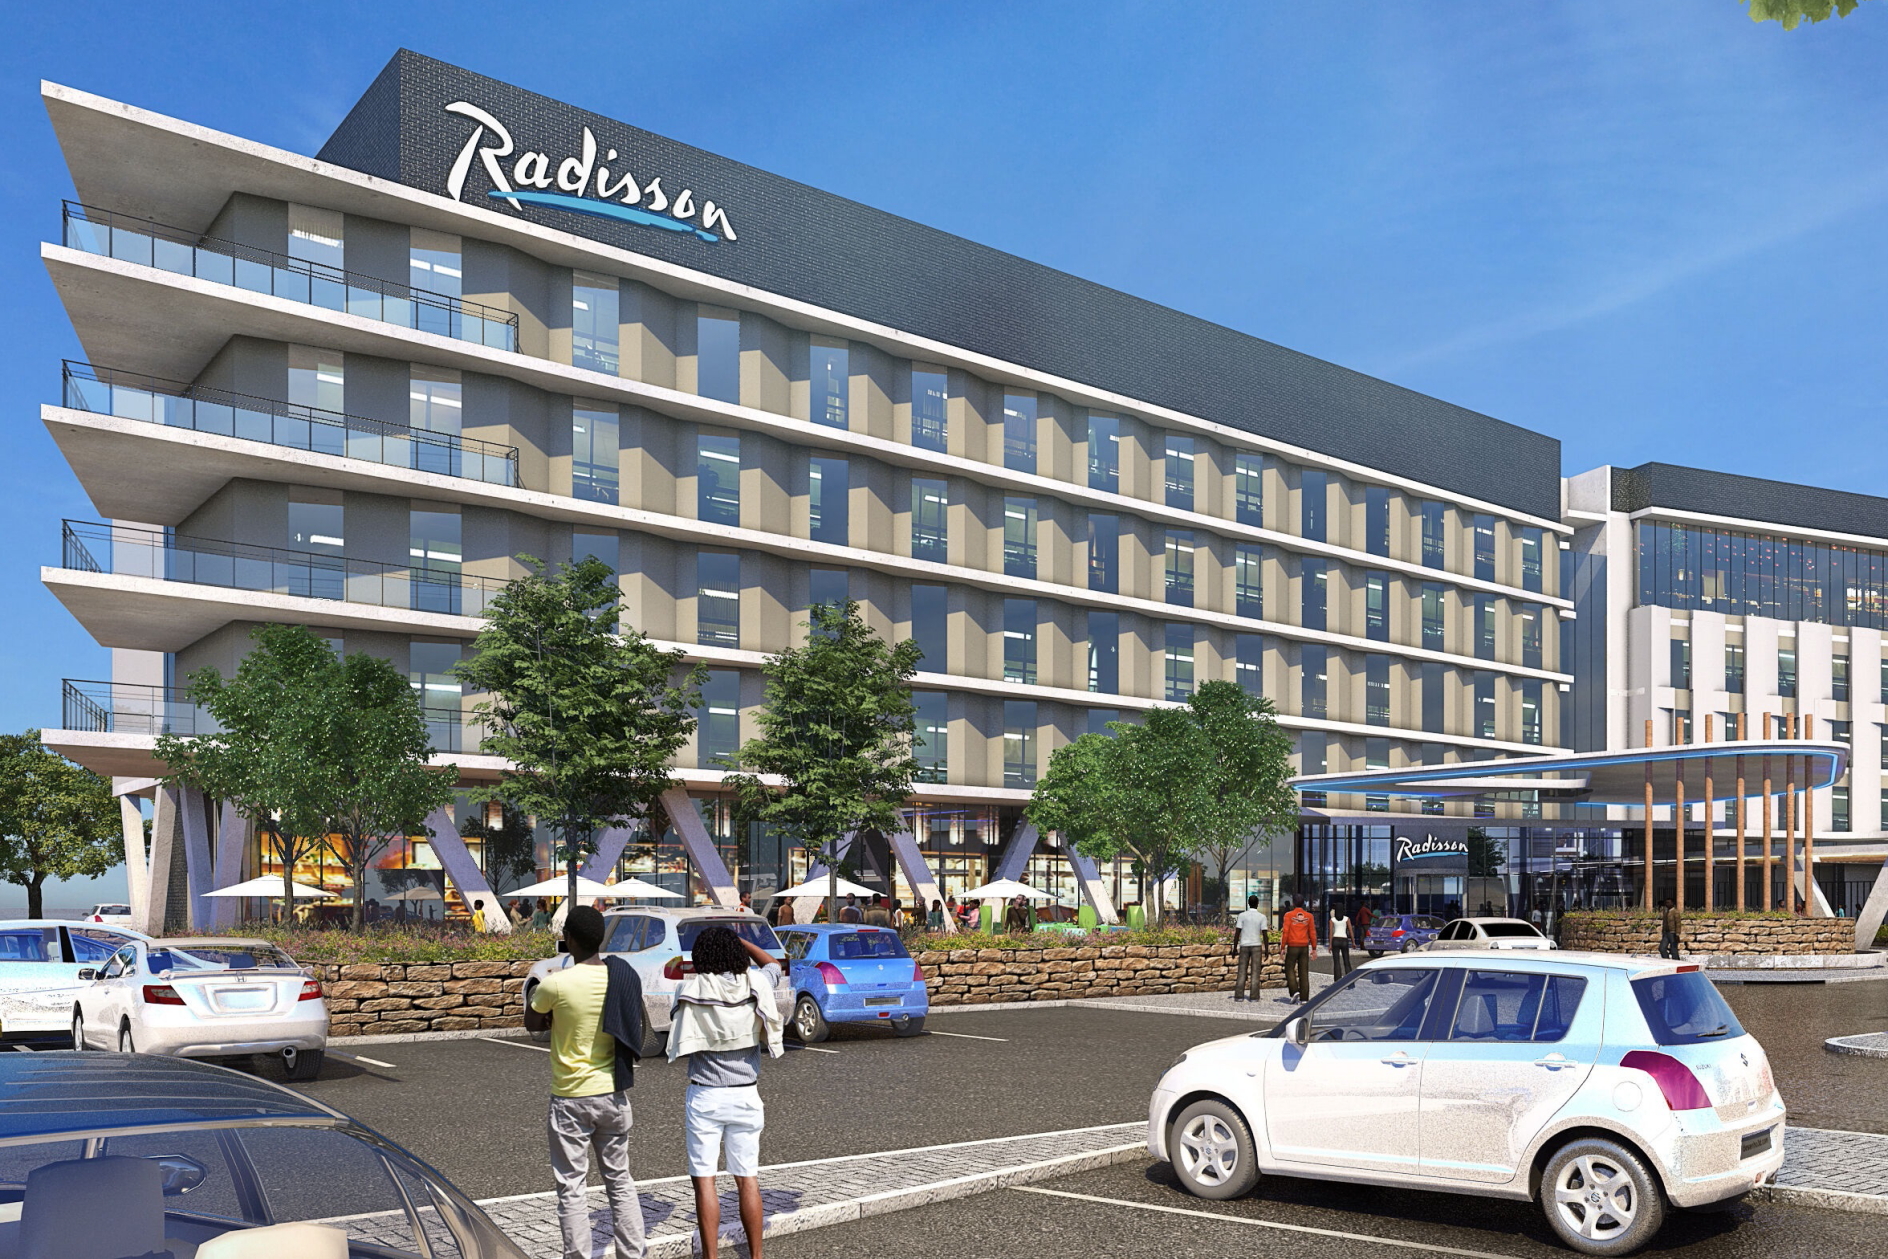 Scheduled to open at the end of 2023, the Radisson Hotel Middelburg will be located adjacent to a brand new convention centre. Click to enlarge.